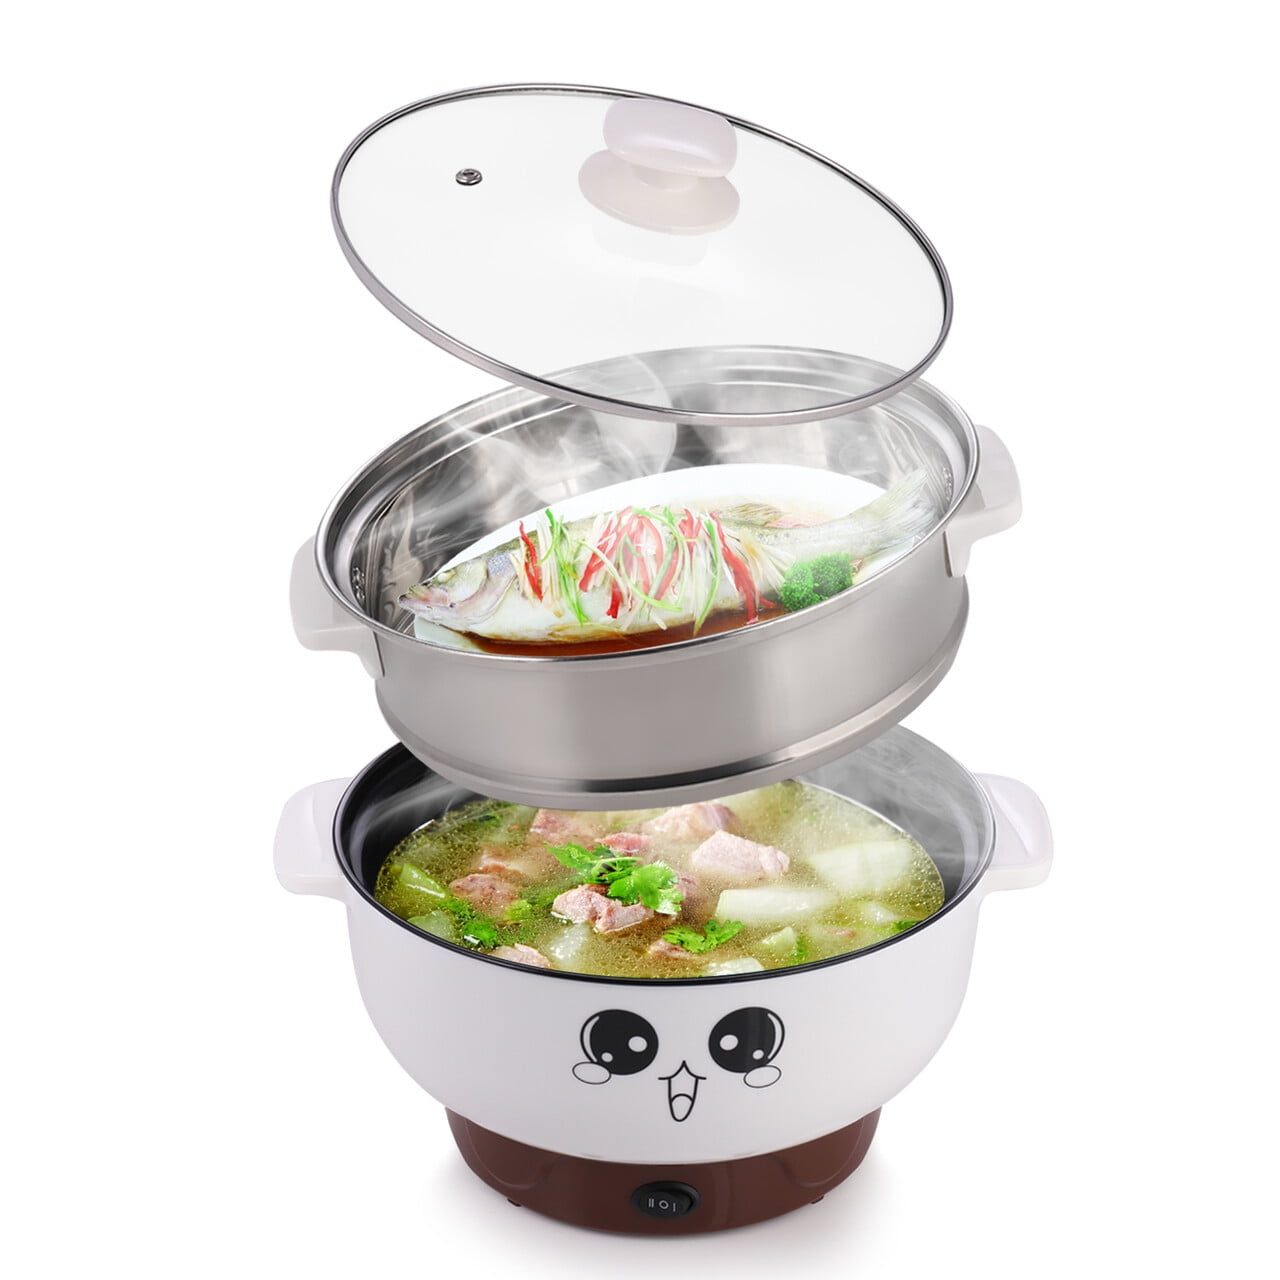 Multi-function Electric Skillet Noodle Rice Cooker Cooking Stainless Steel 2.3L 